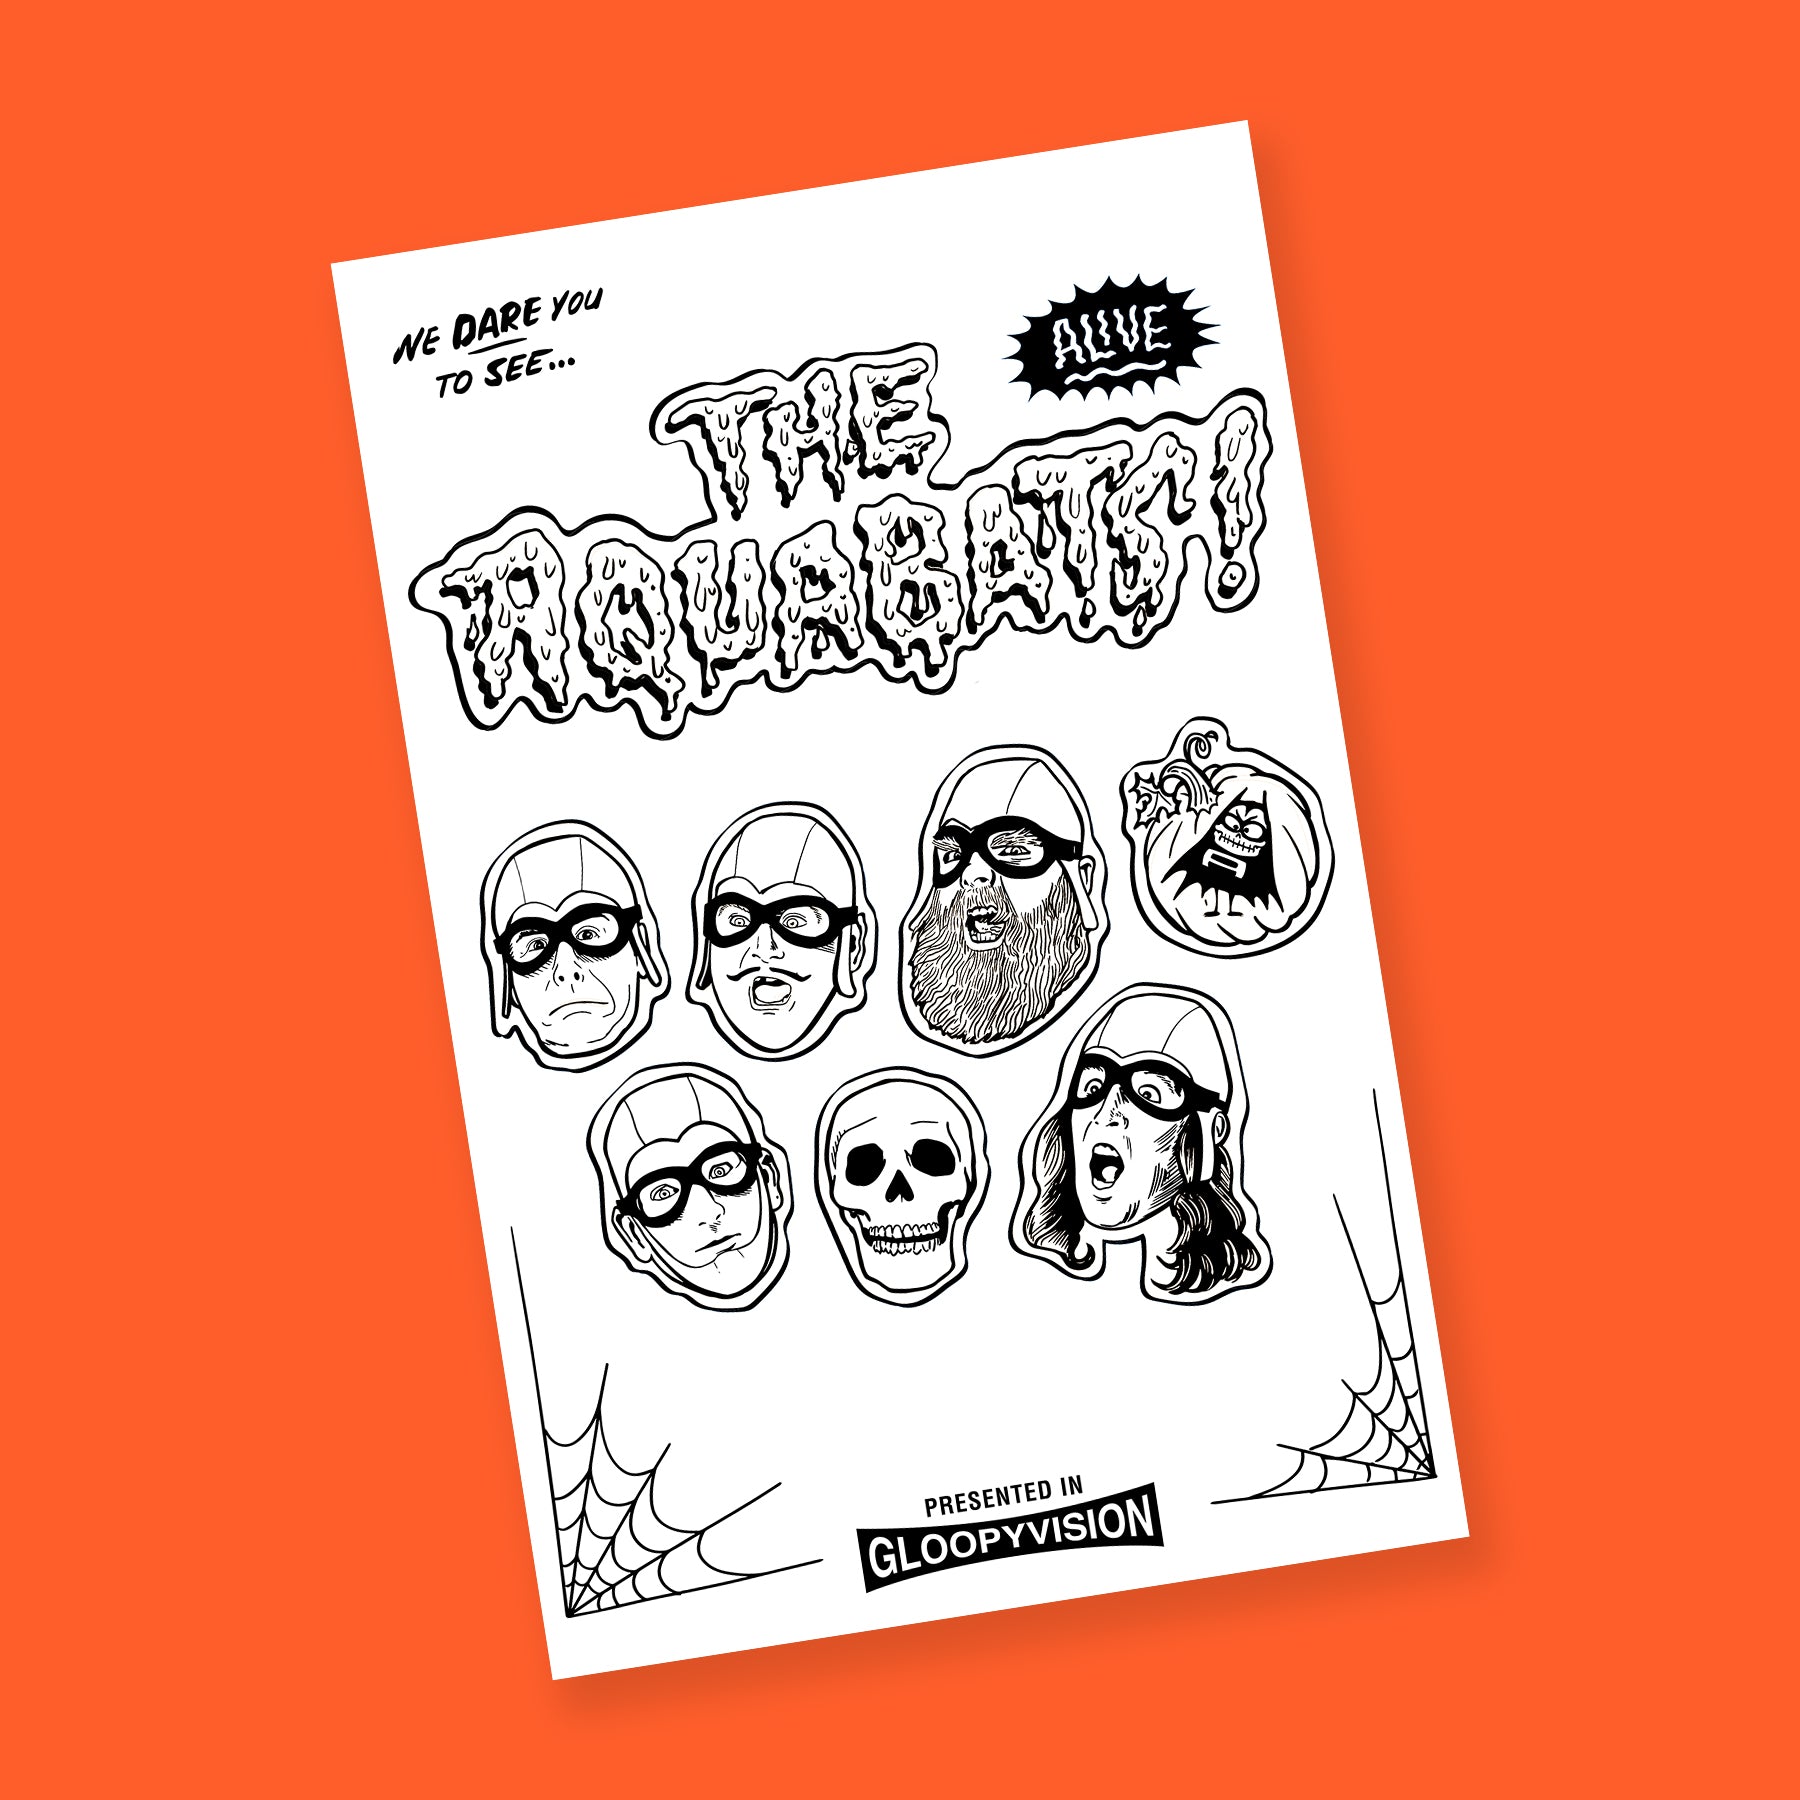 The Aquabats! In GLOOPYVISION! Poster Size Coloring Sheet